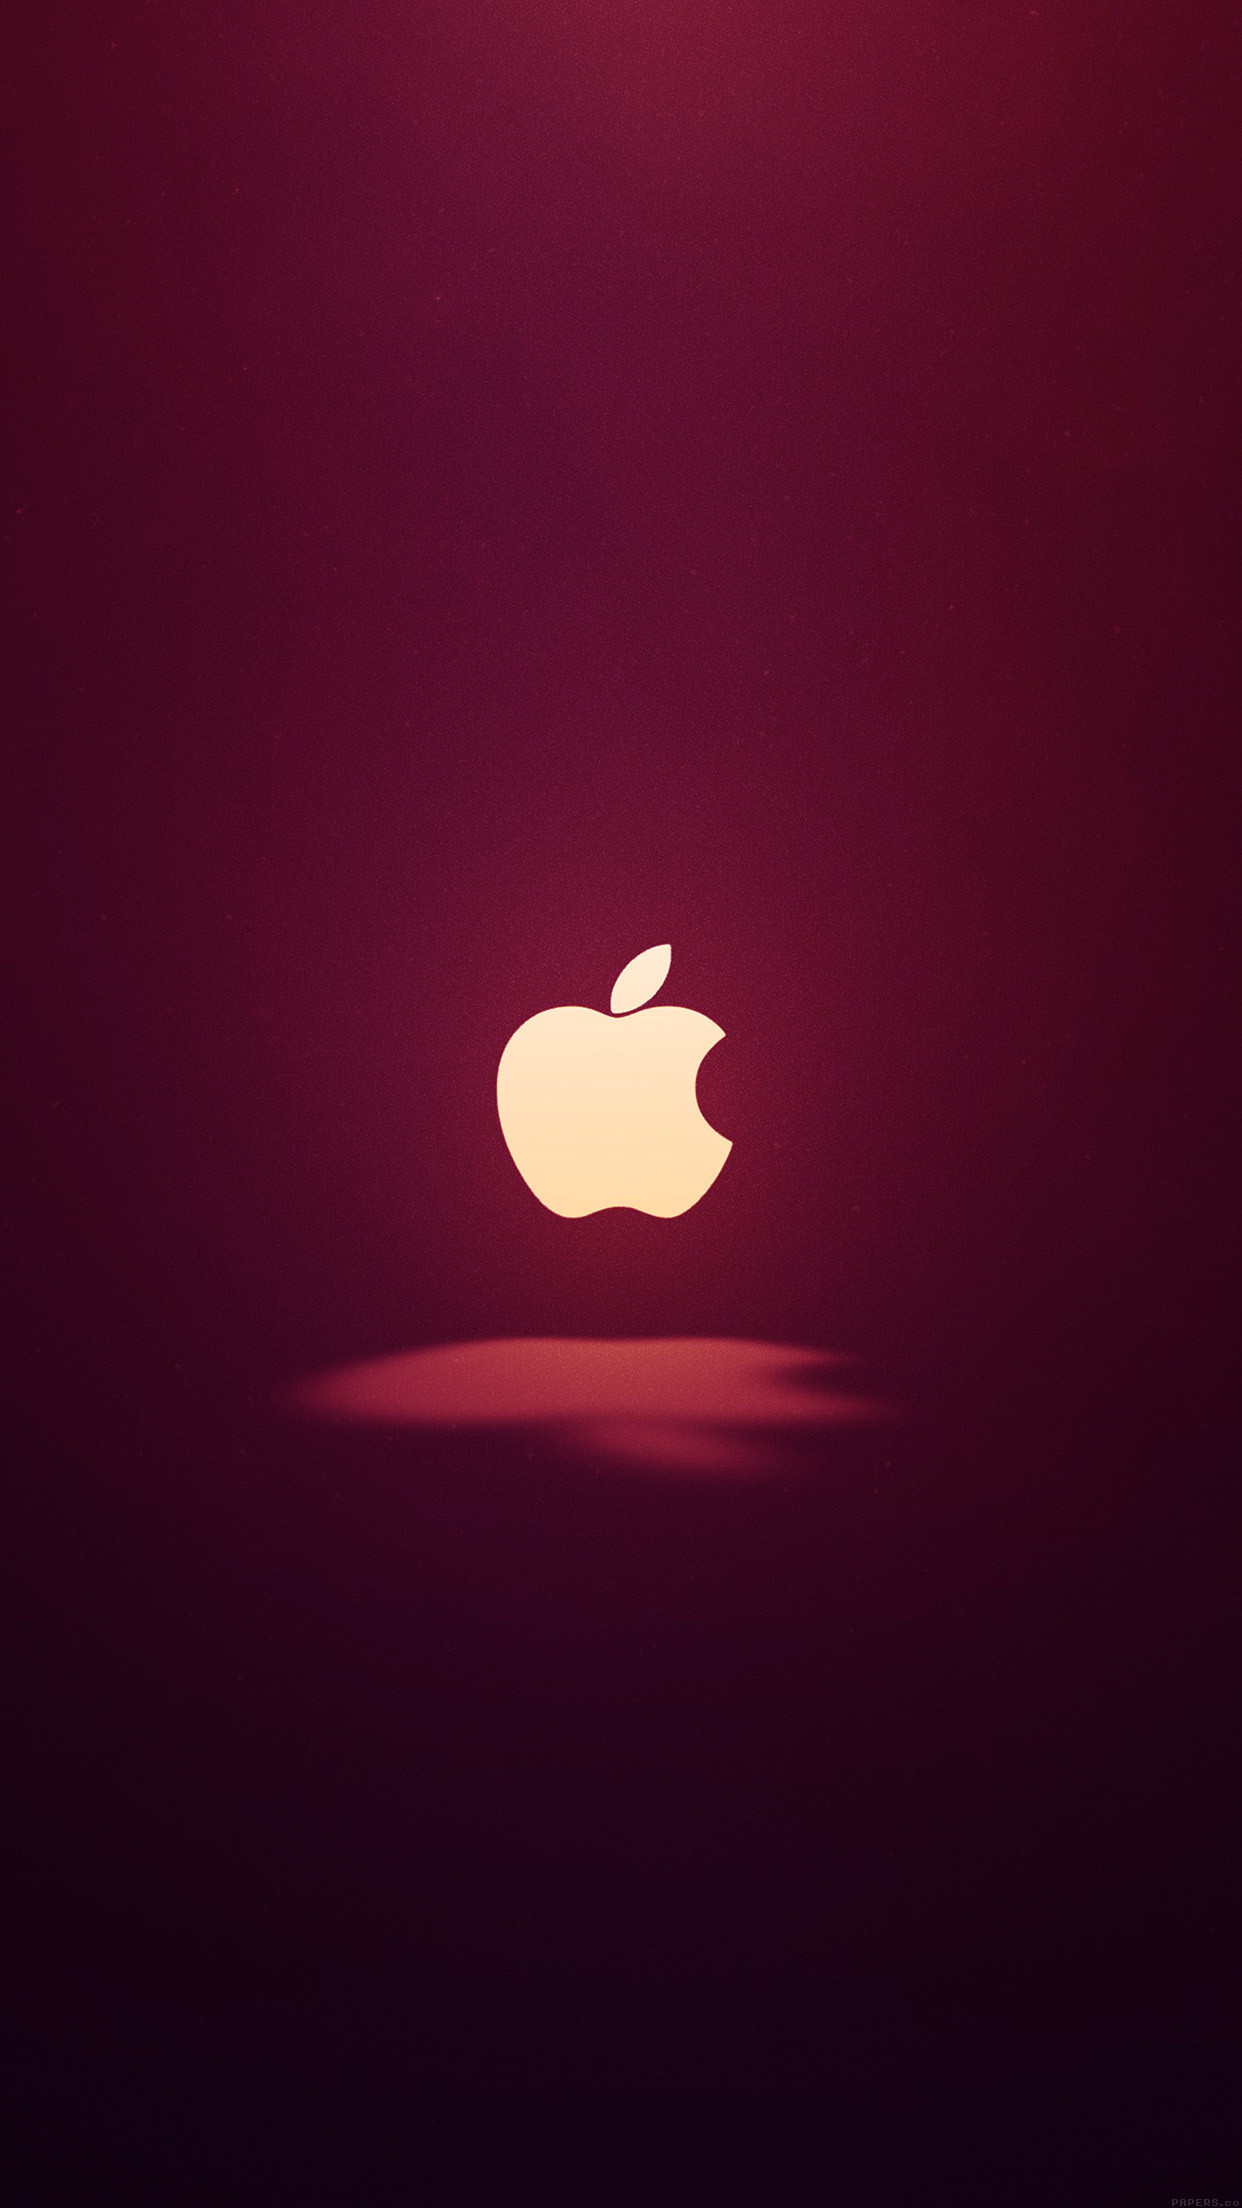 1242x2208 awesome apple-logo-love-mania-wine-red-iphone6-plus